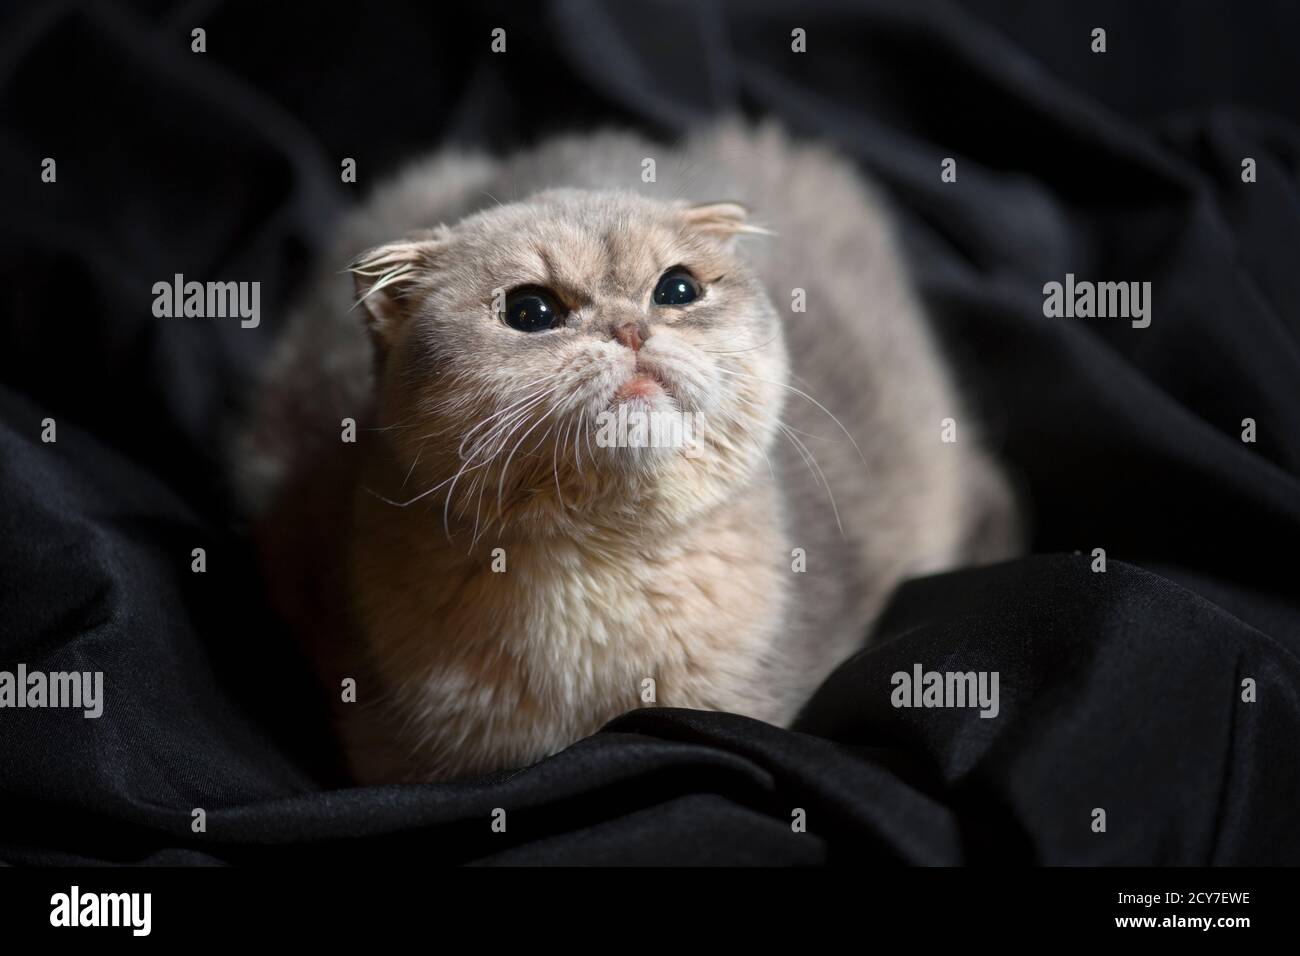 Cream colored scottish fold kitten sitting in dark fabric, looking up above the camera. Stock Photo